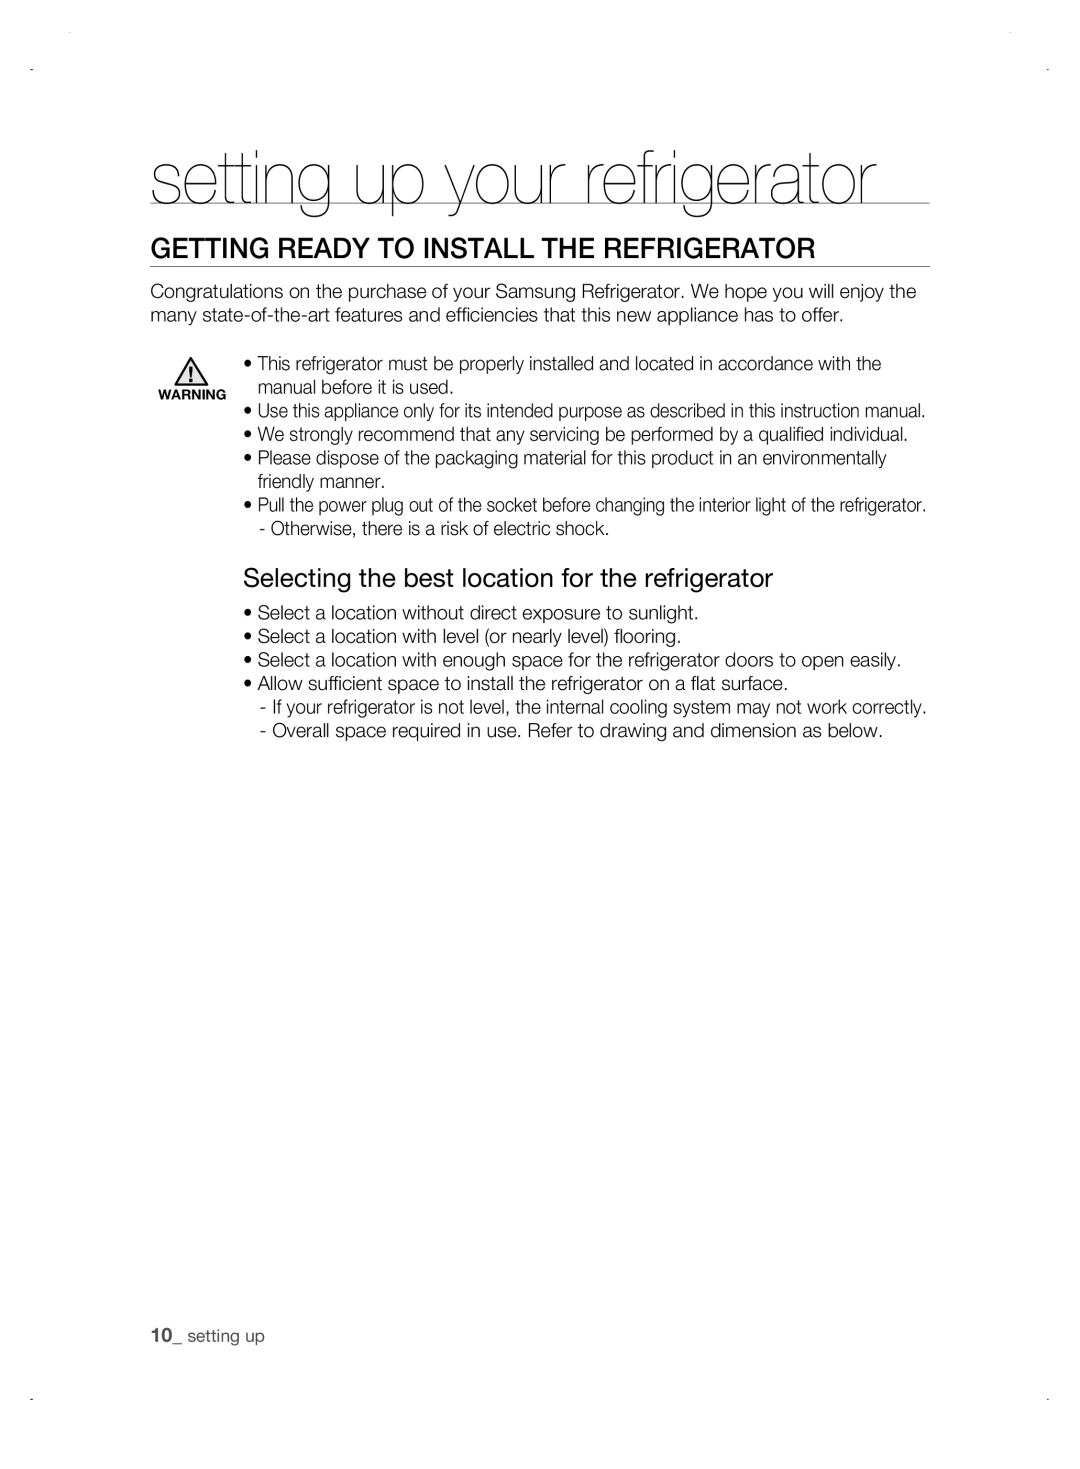 Samsung DA99-01906A user manual setting up your refrigerator, gEtting rEaDy to instaLL tHE rEfrigErator 